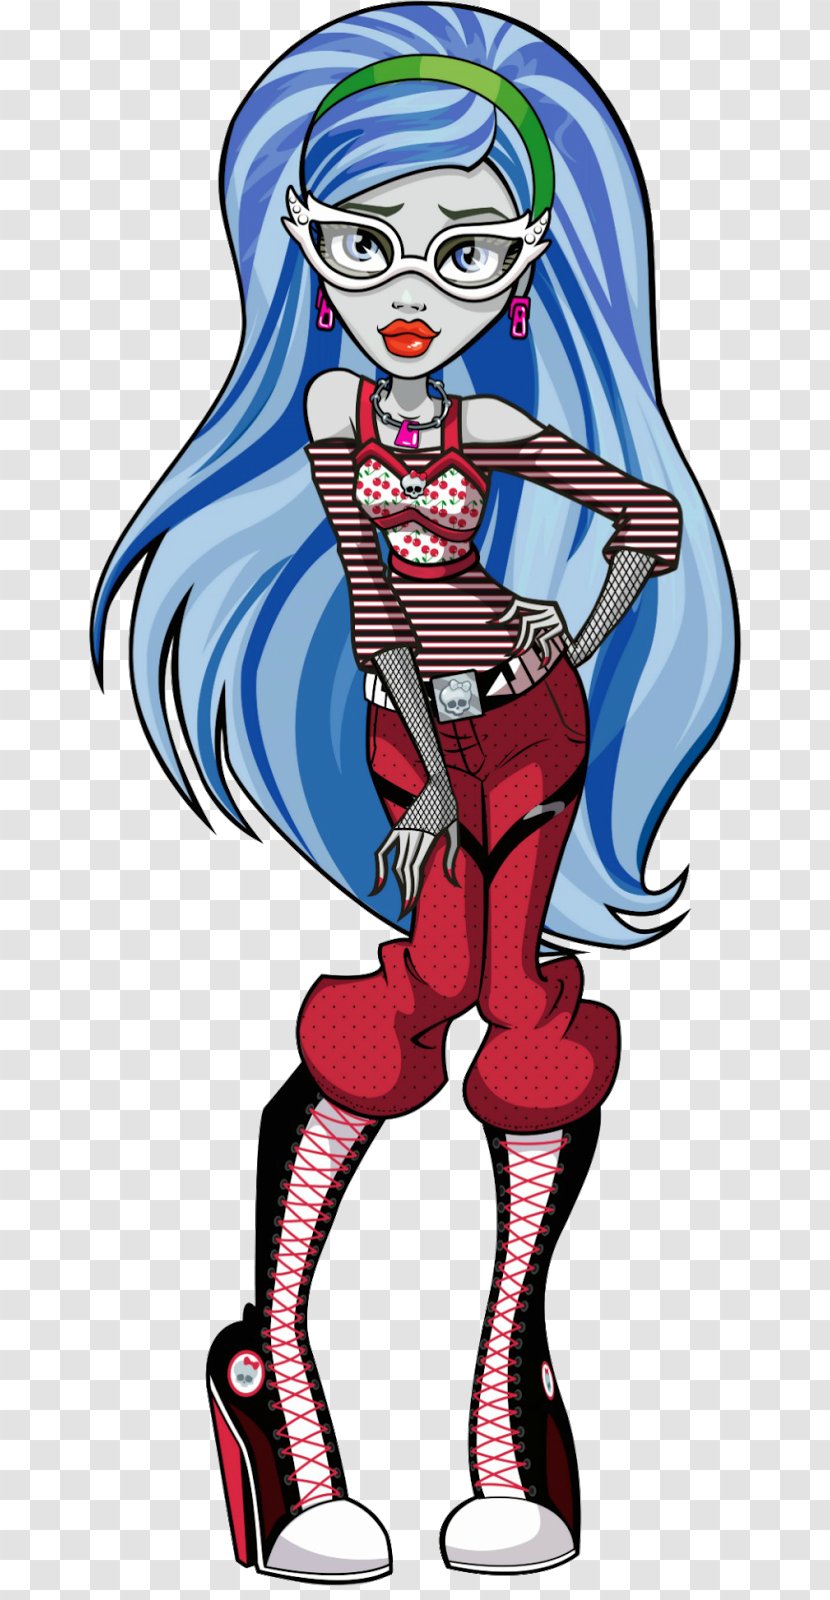 Monster High Ghoulia Yelps Doll - Cartoon - Ghoul Transparent PNG